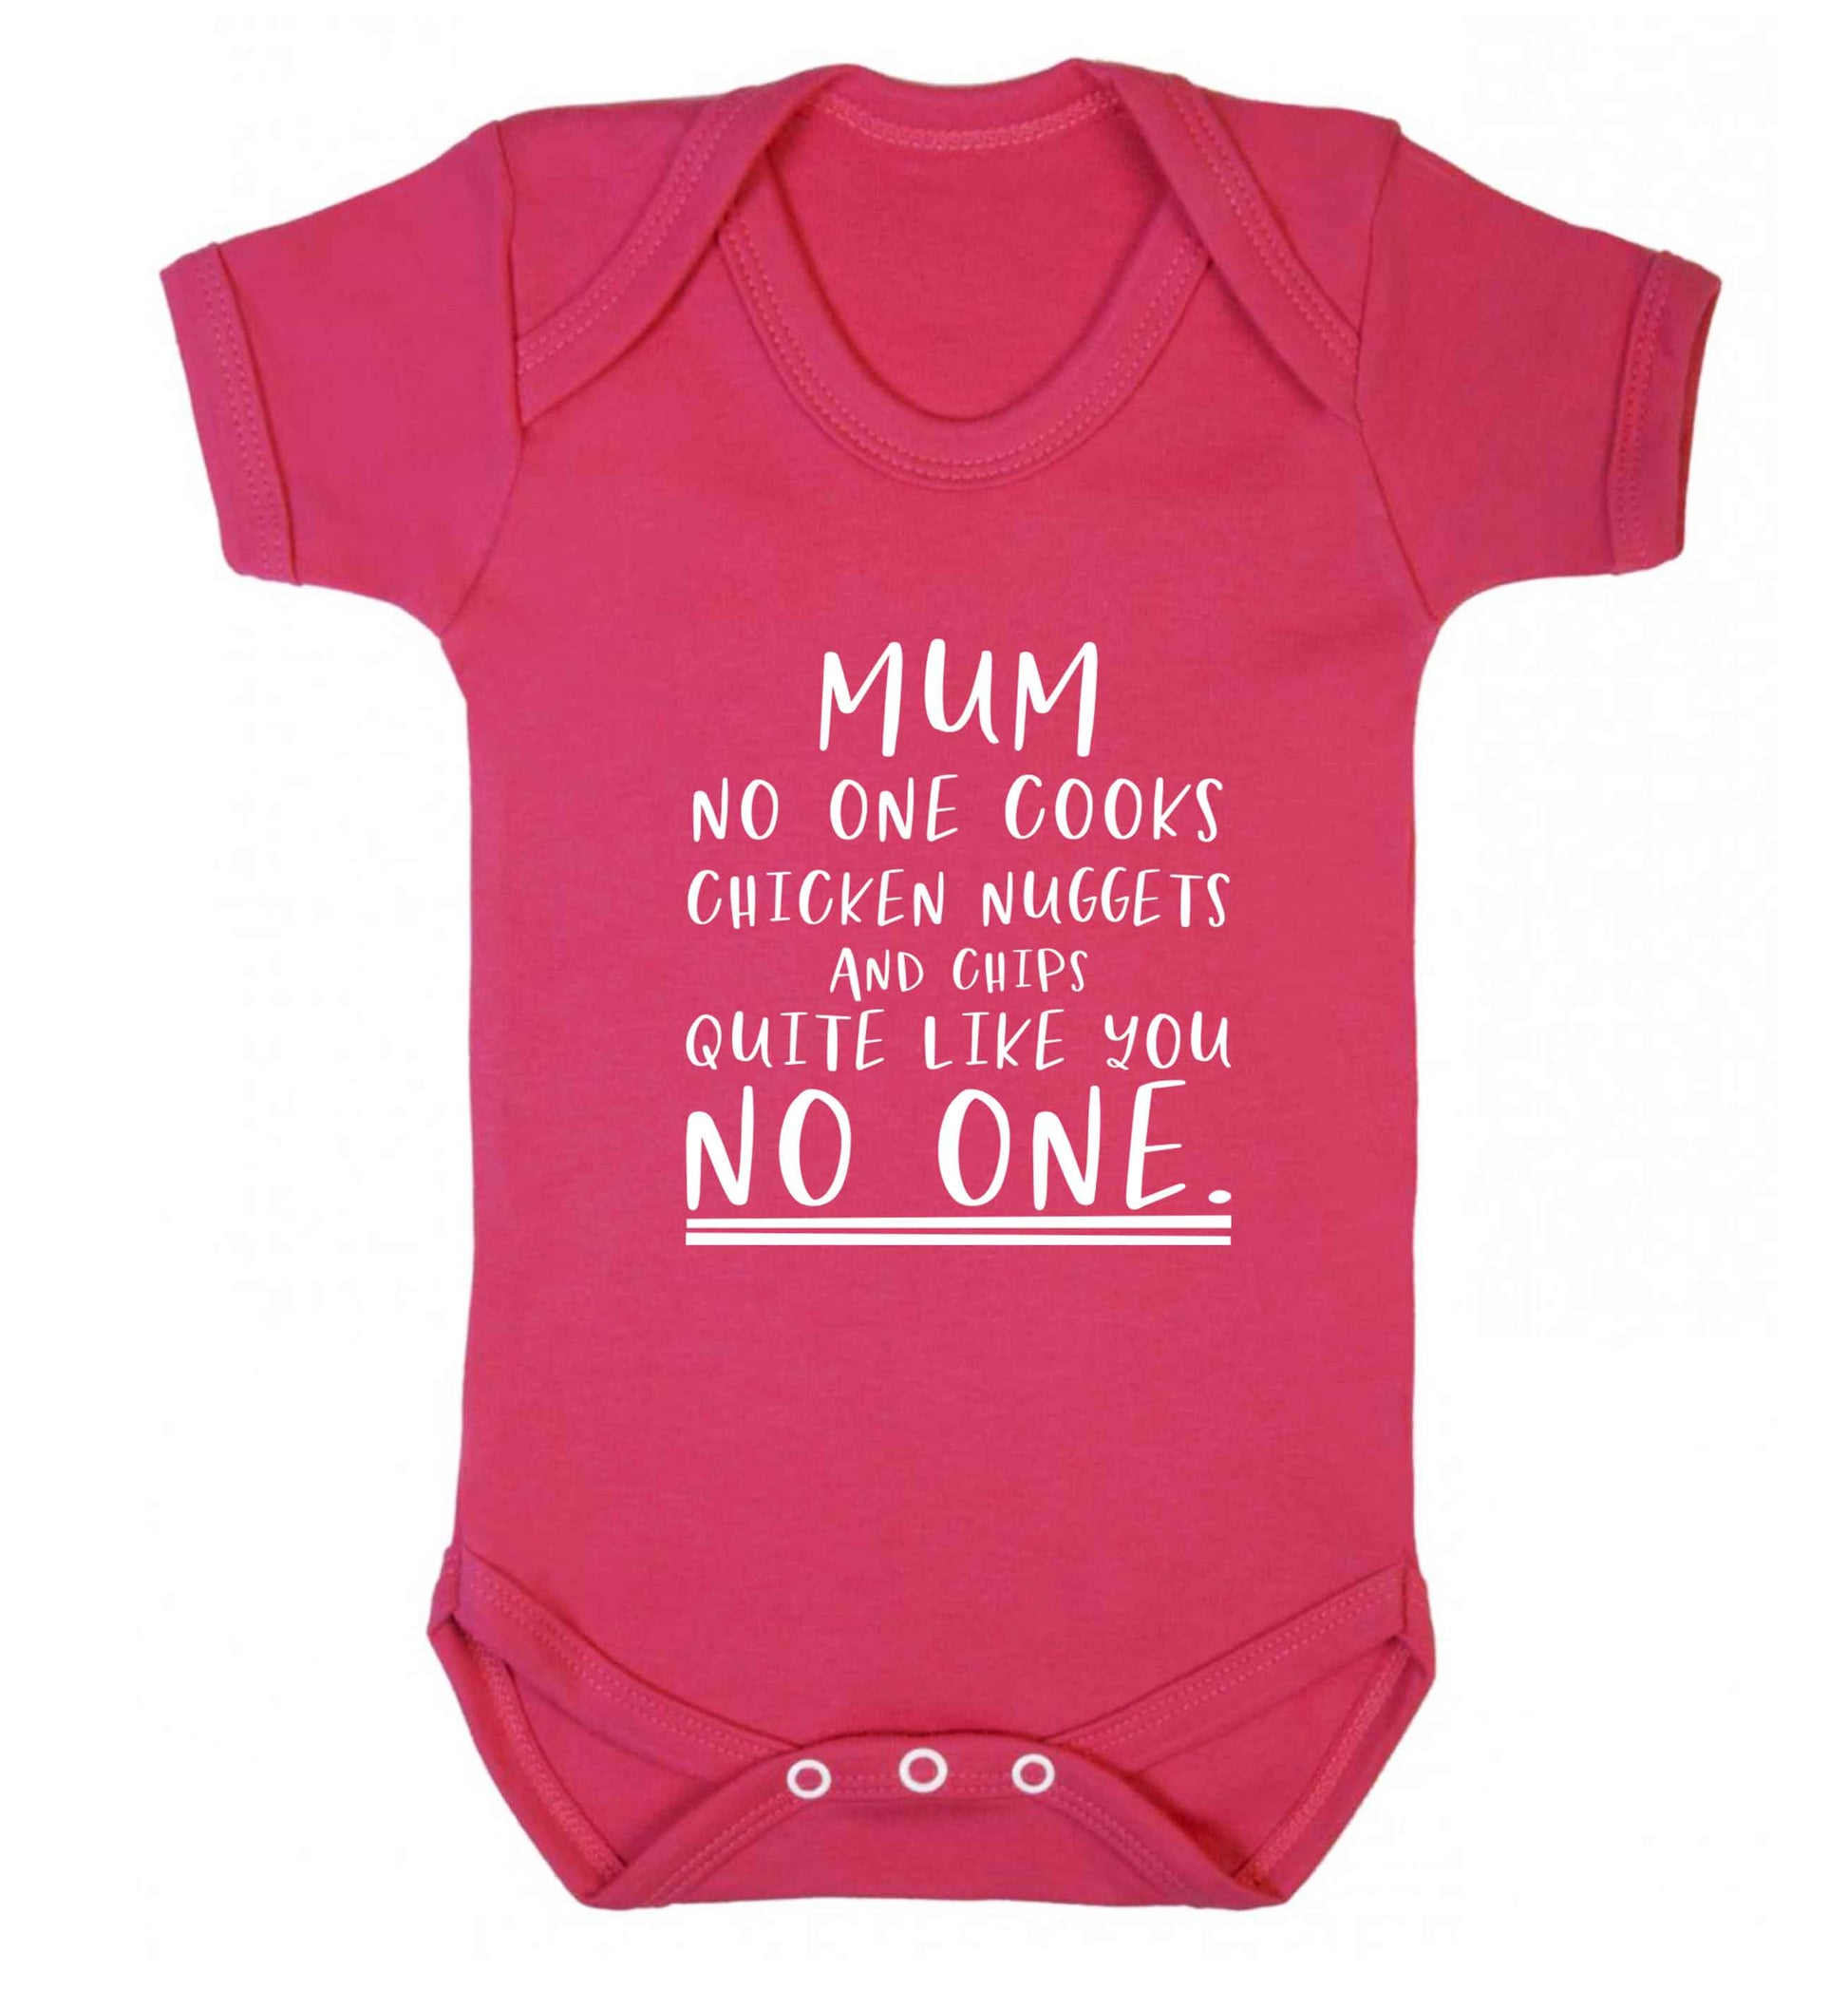 Super funny sassy gift for mother's day or birthday!  Mum no one cooks chicken nuggets and chips like you no one baby vest dark pink 18-24 months